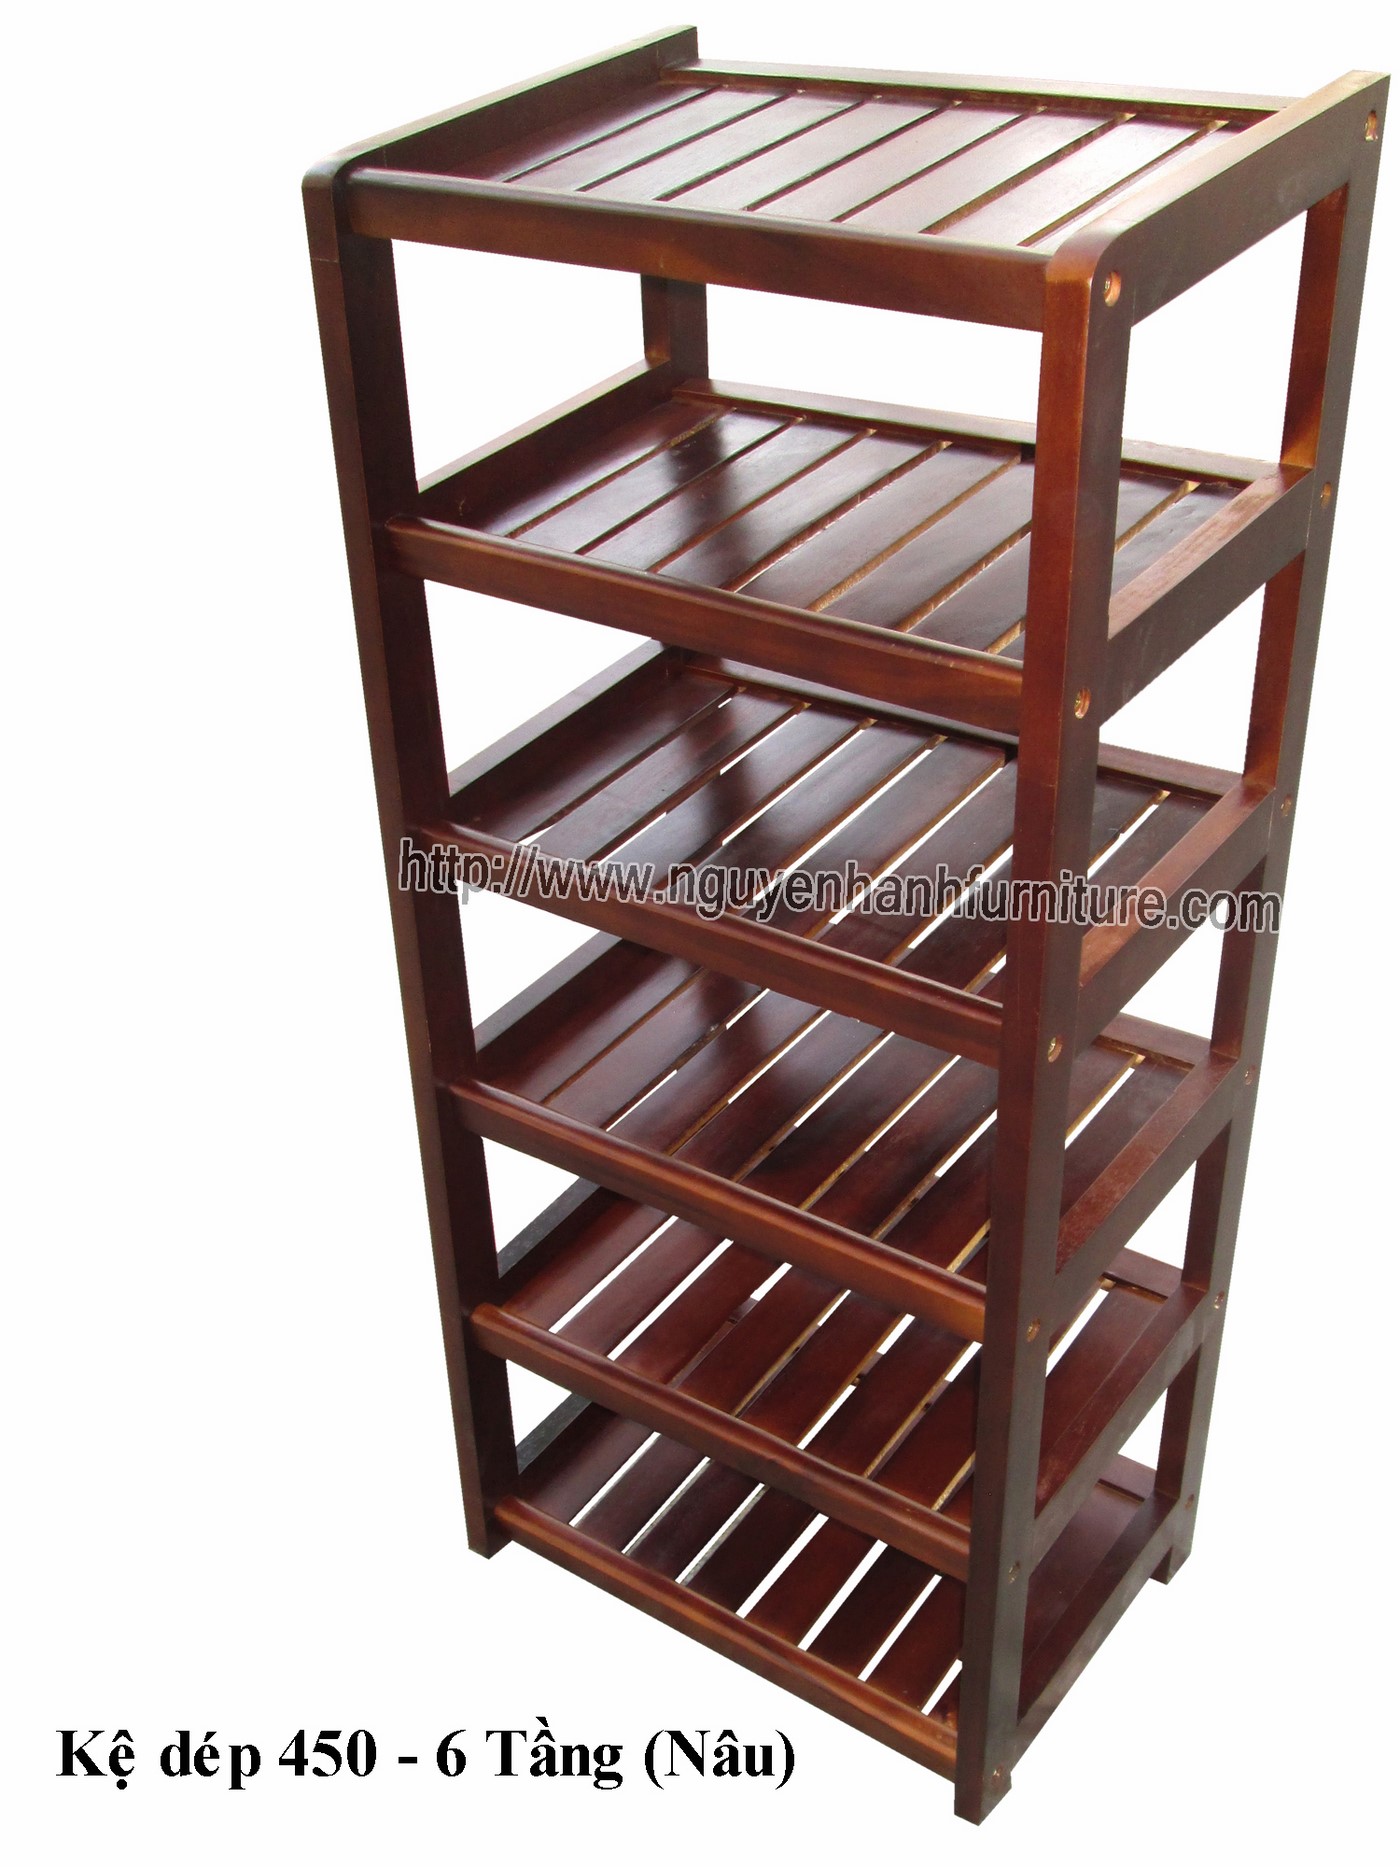 Name product: Shoeshelf 6 Floors 45 with sparse blades (Brown) - Dimensions: 45 x 30 x 98 (H) - Description: Wood natural rubber